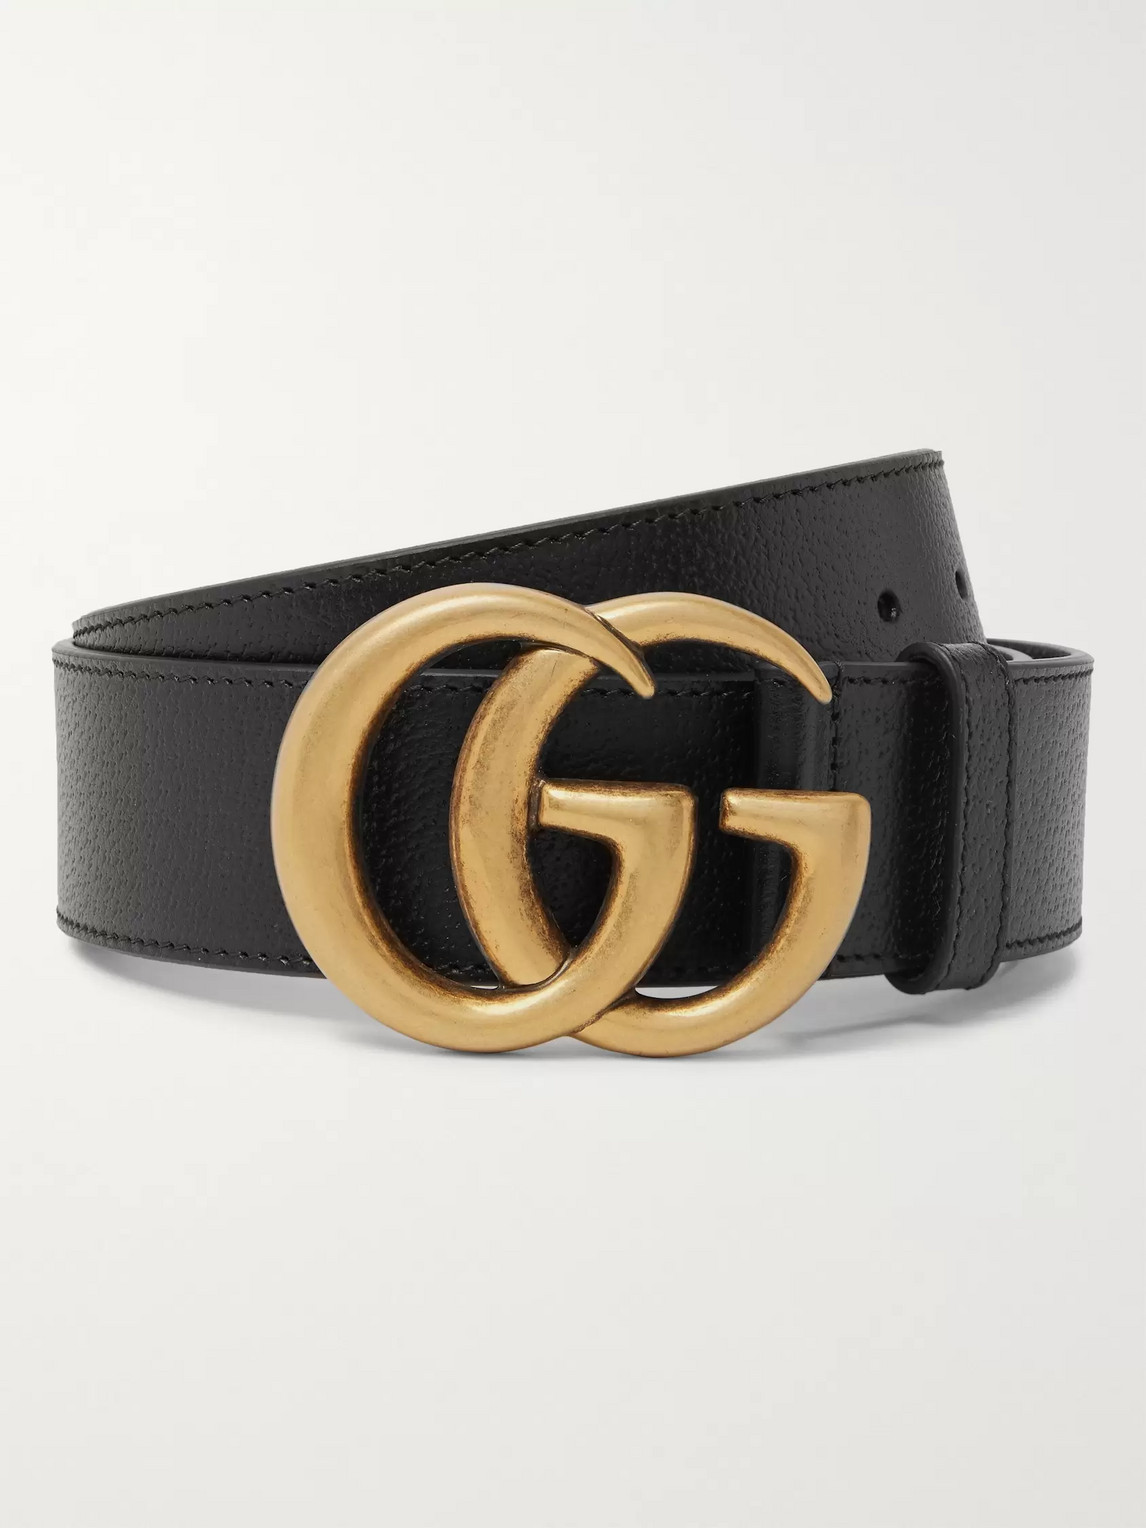 Gucci Gg Marmont Leather Belt With Shiny Buckle In Black Leather | ModeSens